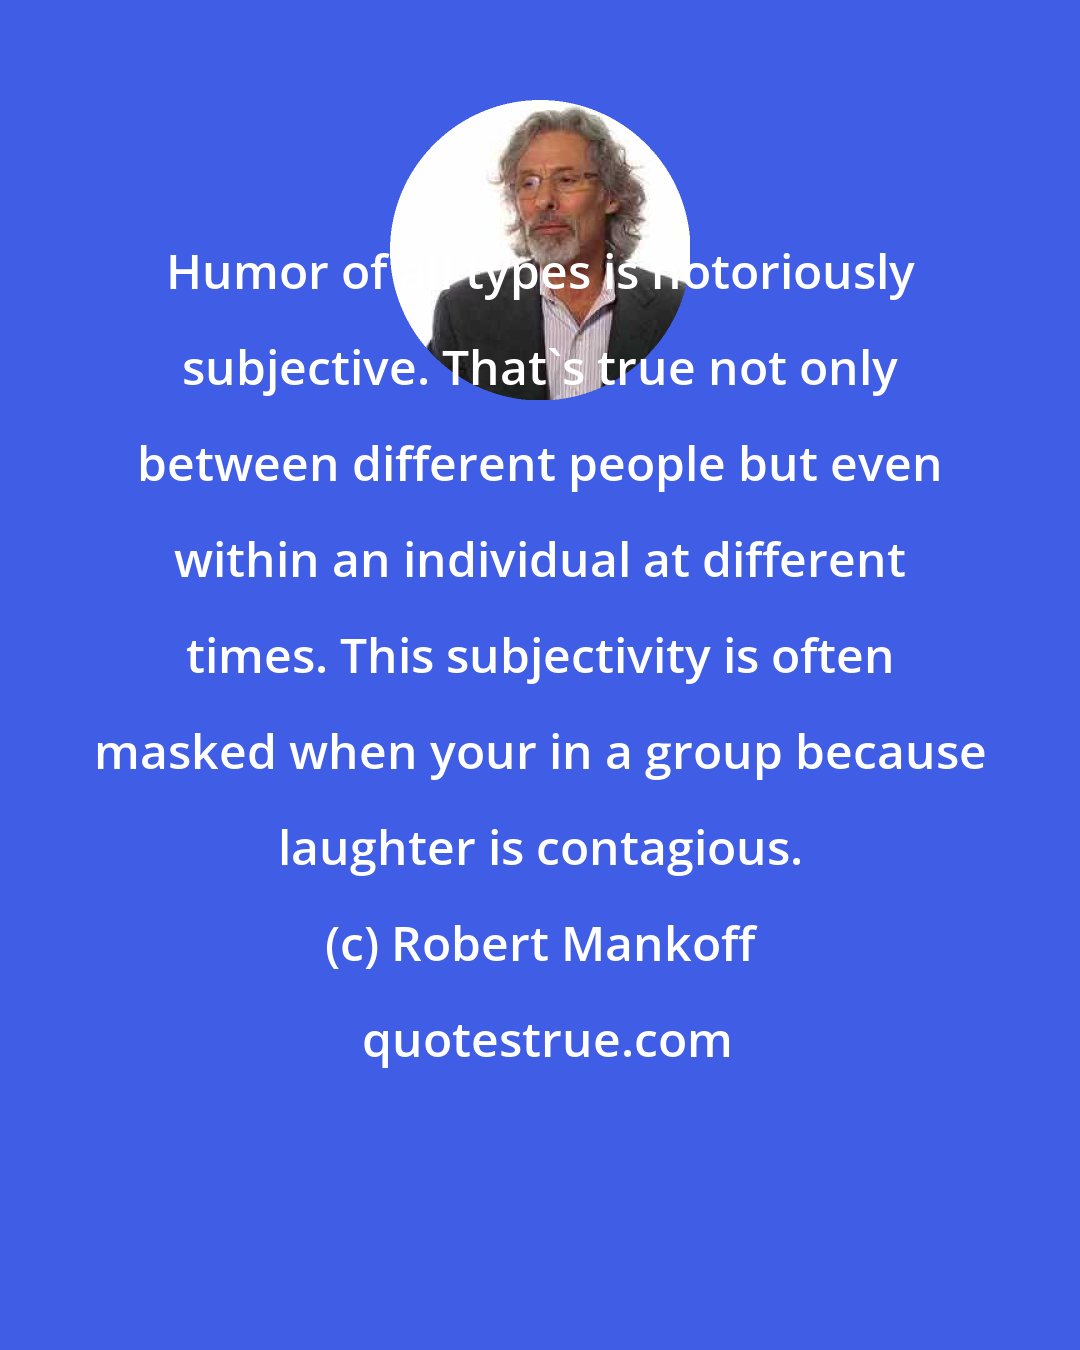 Robert Mankoff: Humor of all types is notoriously subjective. That's true not only between different people but even within an individual at different times. This subjectivity is often masked when your in a group because laughter is contagious.